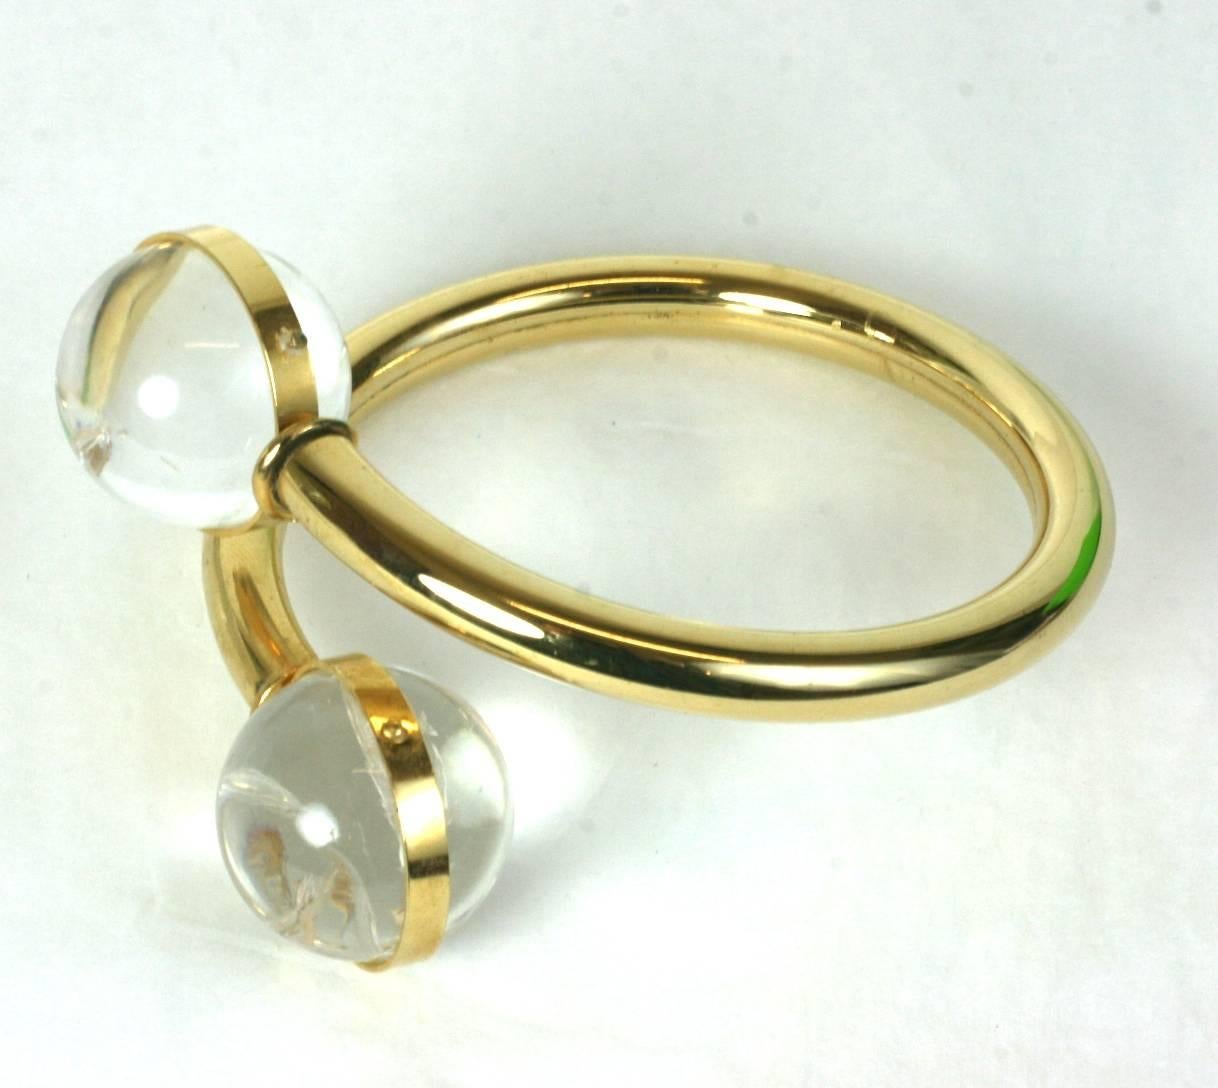 Lucite ball bypass bangle with spheres on the terminals of the gilt tube bracelet. Large and striking with a band of gilt metal holding each sphere. 1980's USA.
Excellent condition. Large size. 
Interior diameter 2.5